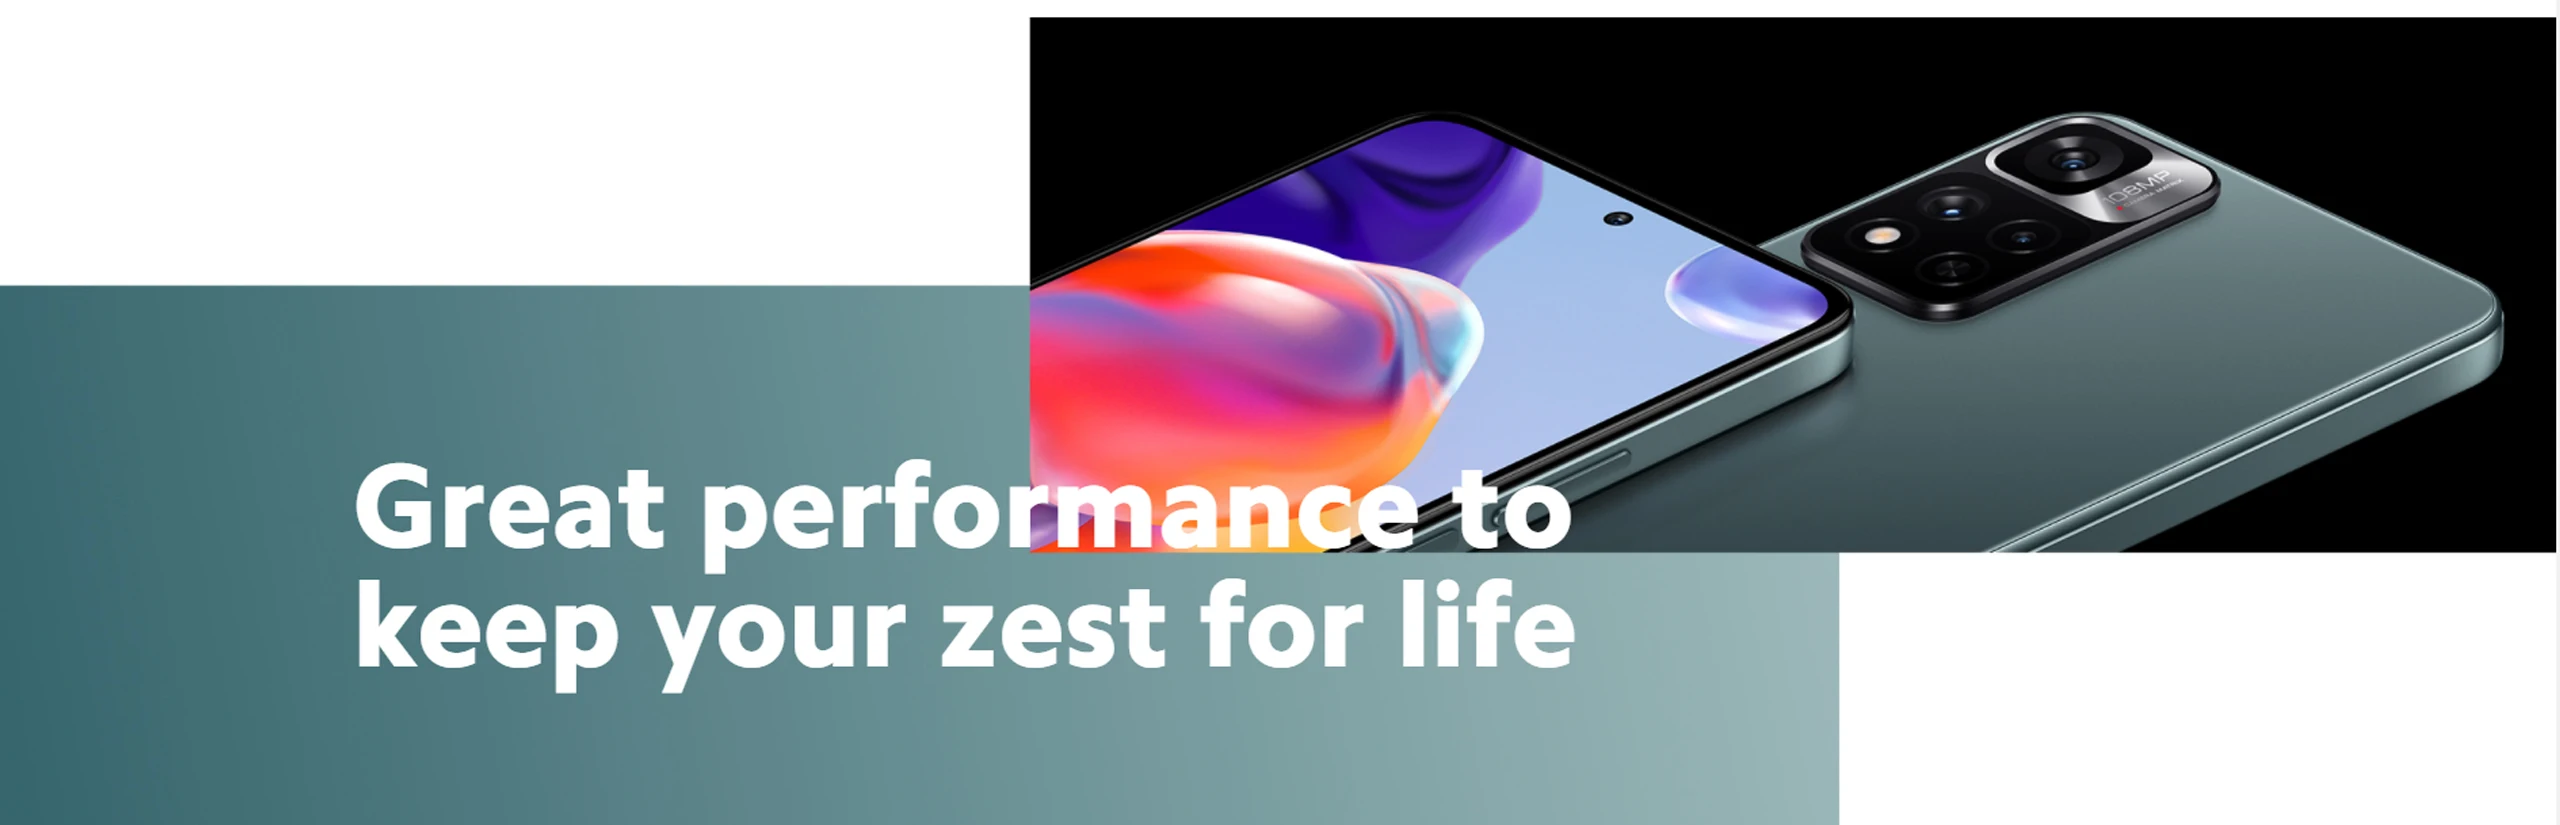  5G technology and powerful performance with the Xiaomi Redmi Note 11 Pro 5G Plus Smartphone.